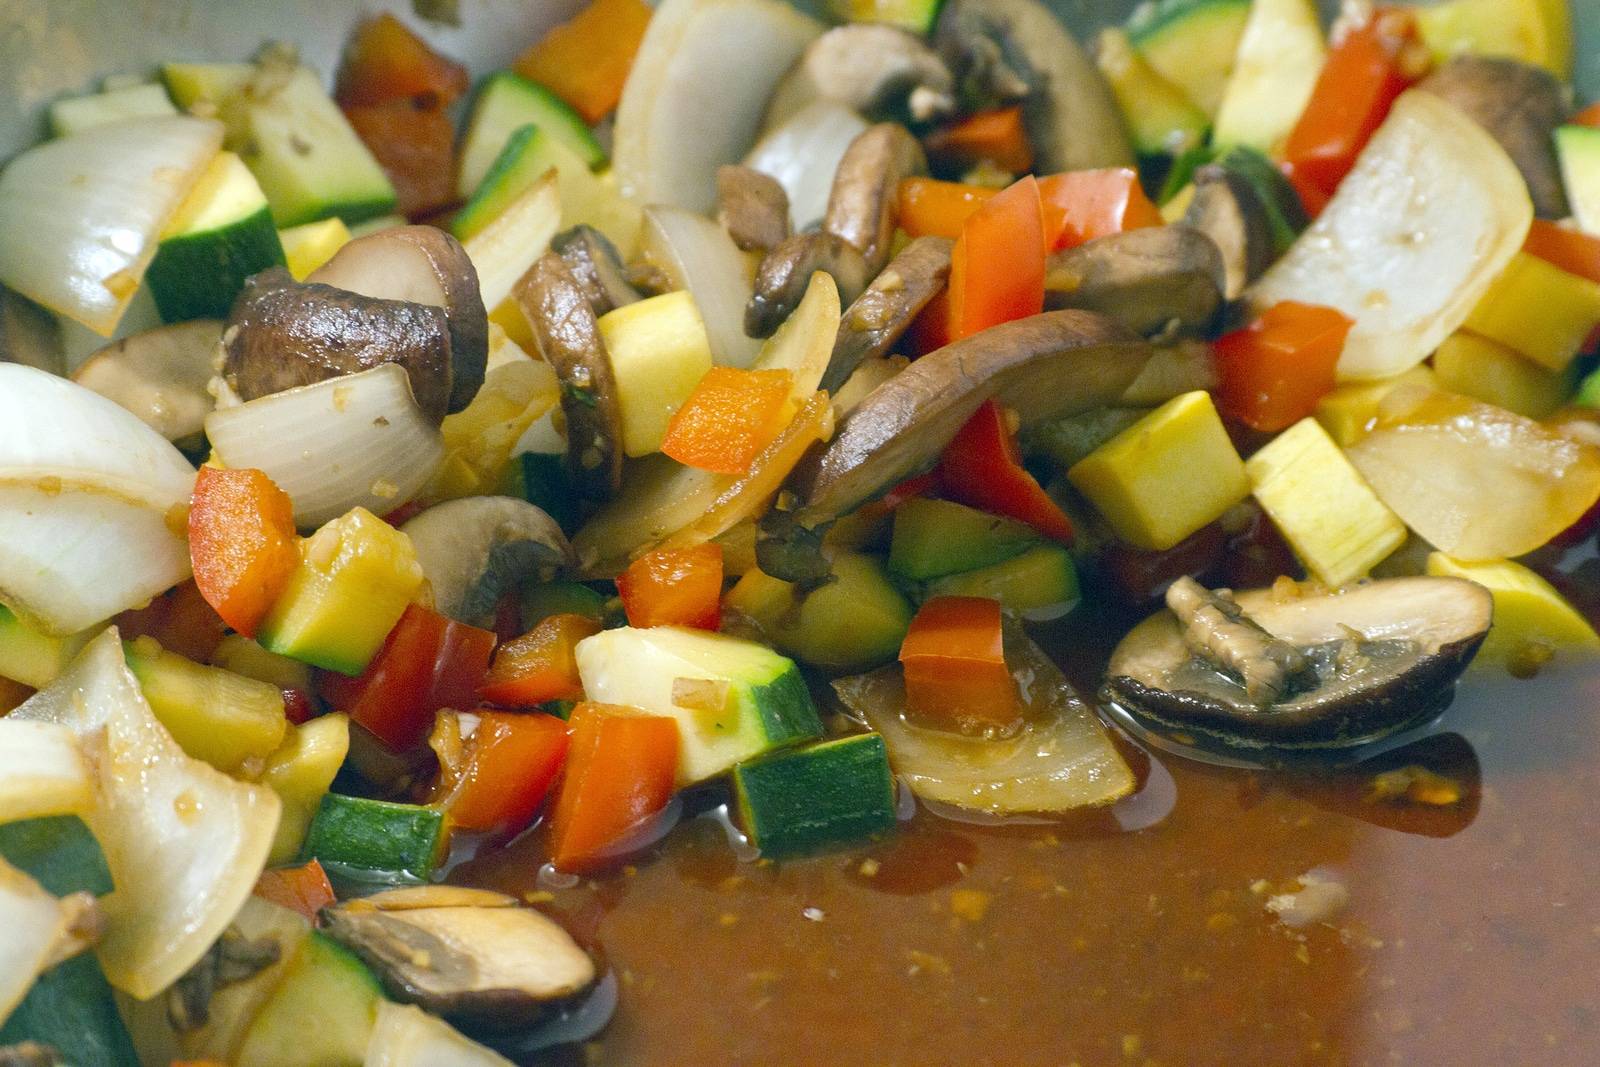 A pan full of juicy, delicious freshly sauteed organic vegetables Plant-Based diet